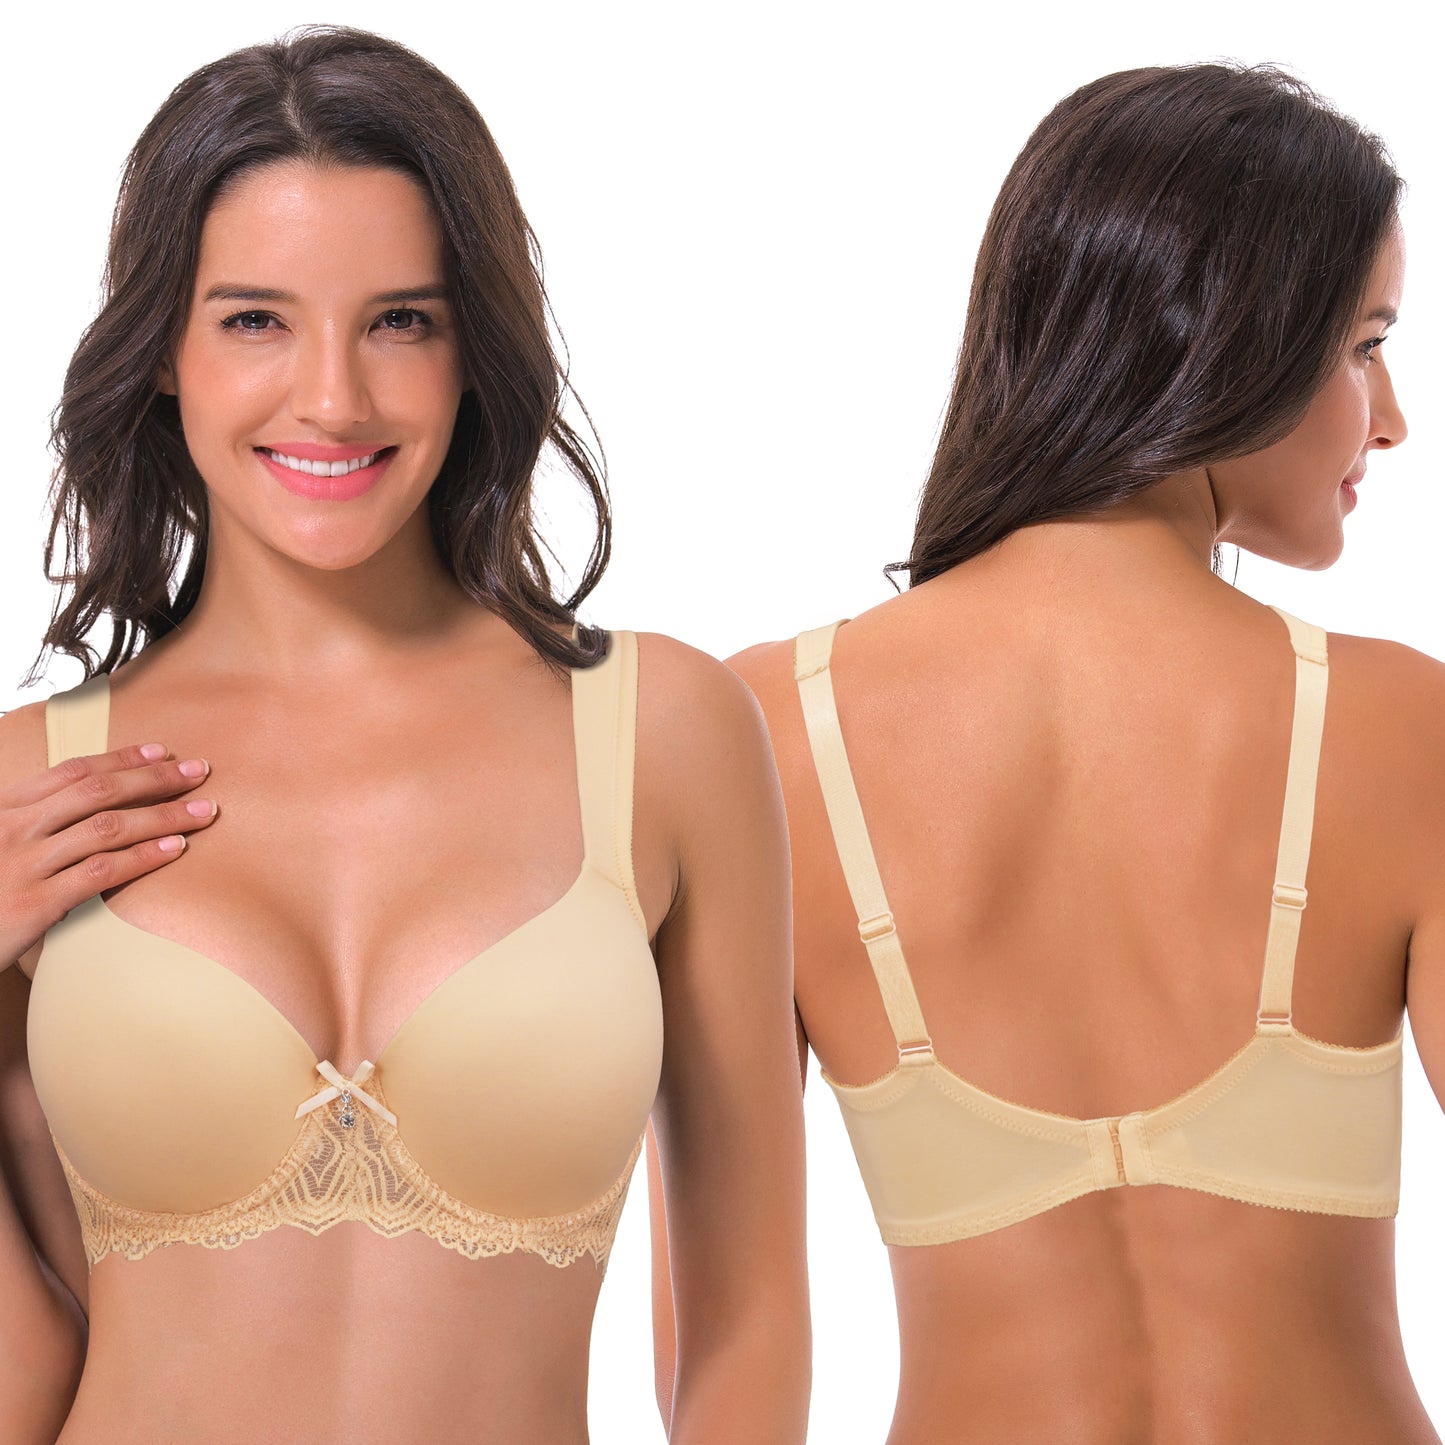 Women's Lightly Padded Underwire Lace Bra with Padded Shoulder Straps-2PK-WHITE,NUDE